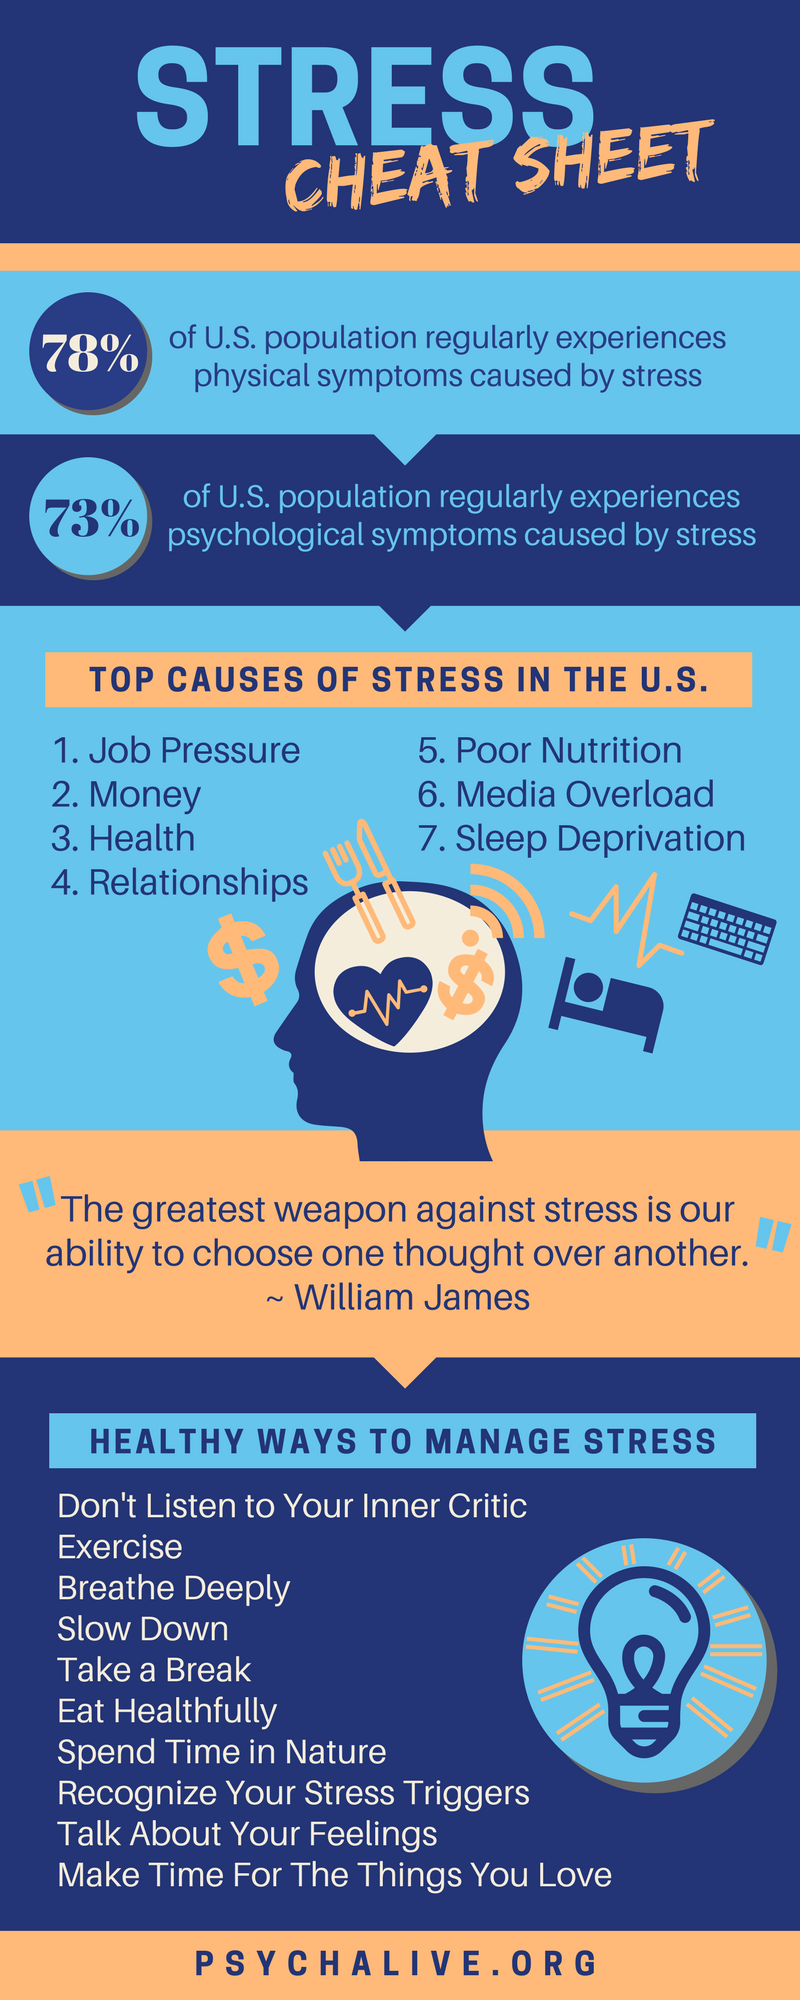 Stress Cheat Sheet: Infographic - PsychAlive